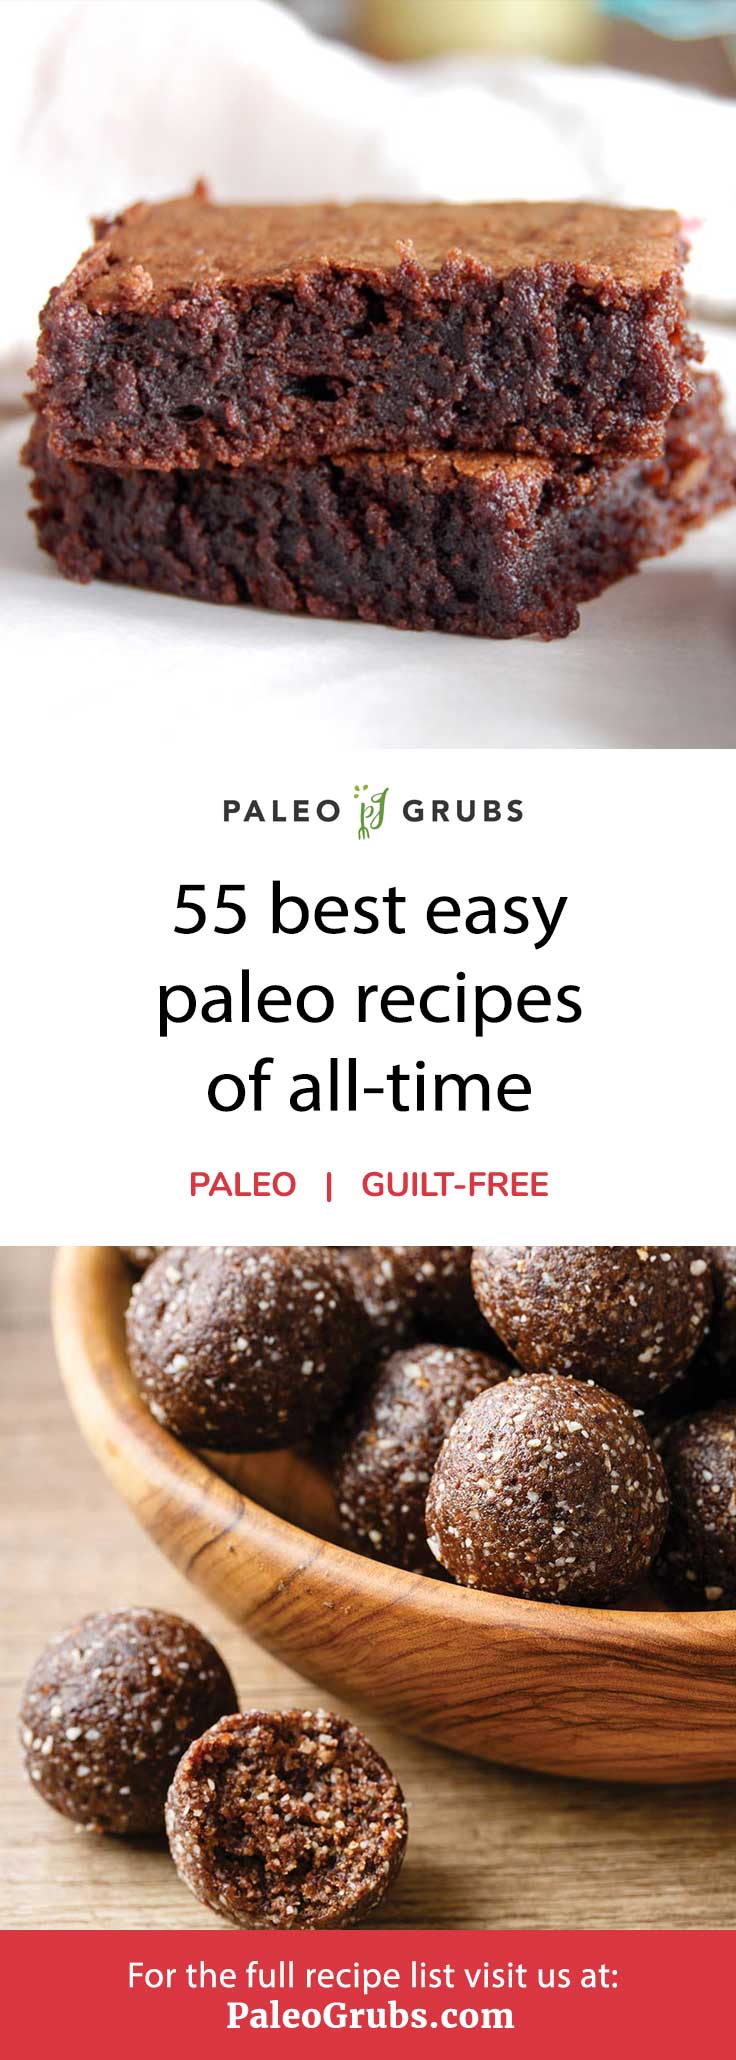 55 Easy Paleo Recipes- the best dinners, breakfasts, desserts and snacks.